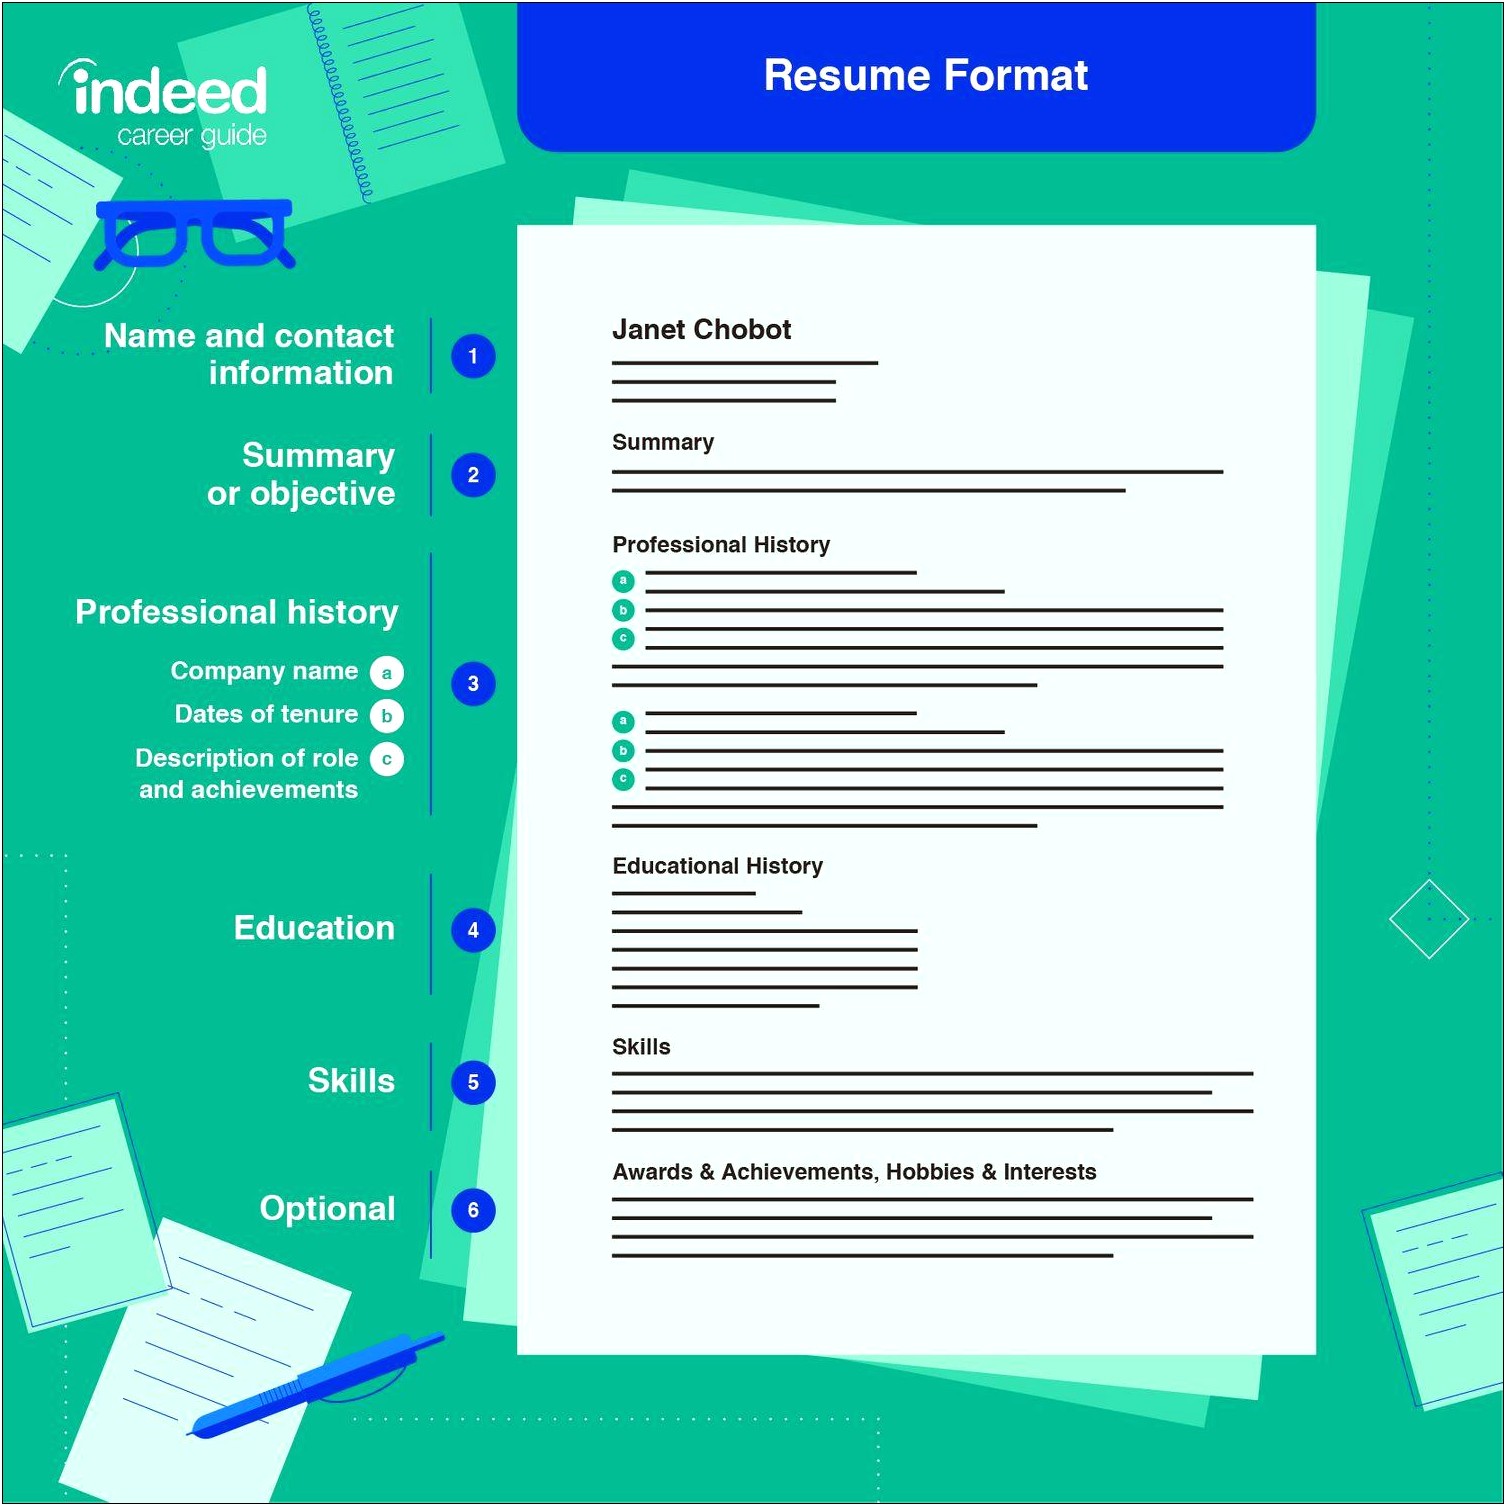 Resume Headings For Non Professional Experience